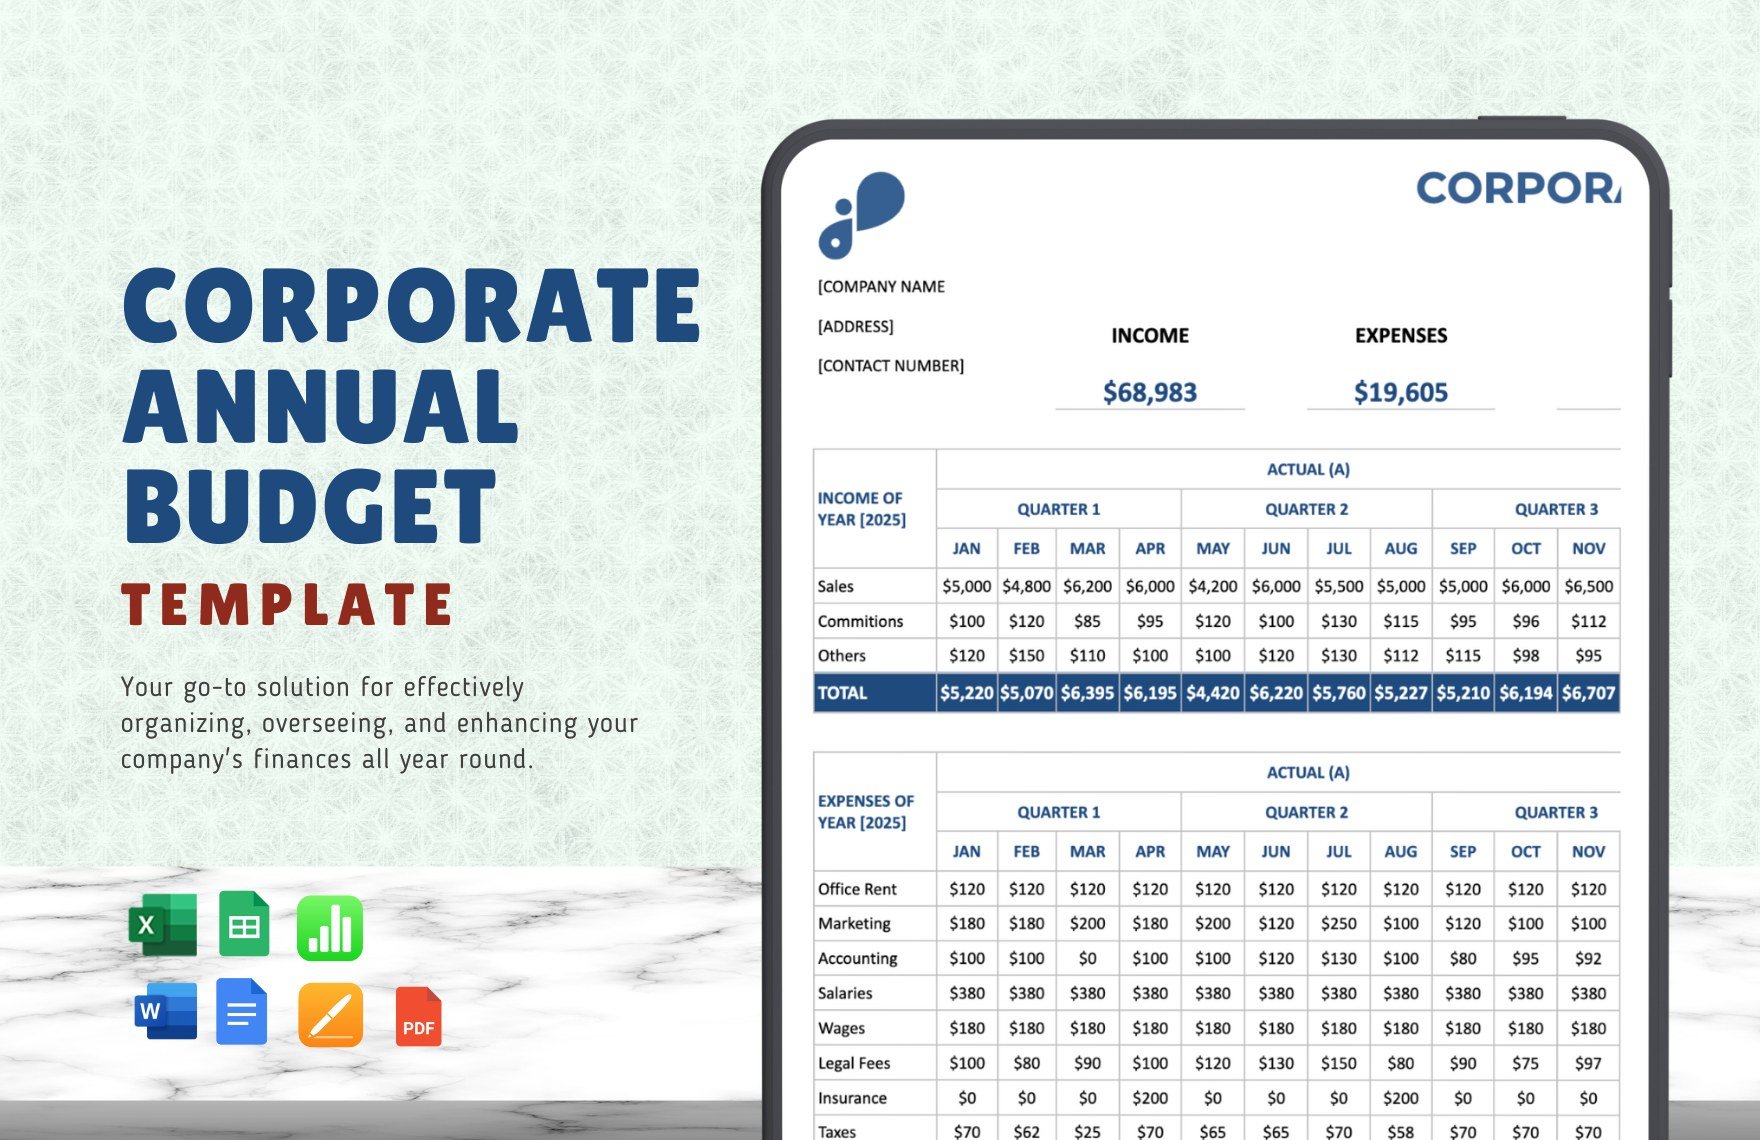 Corporate Annual Budget Template